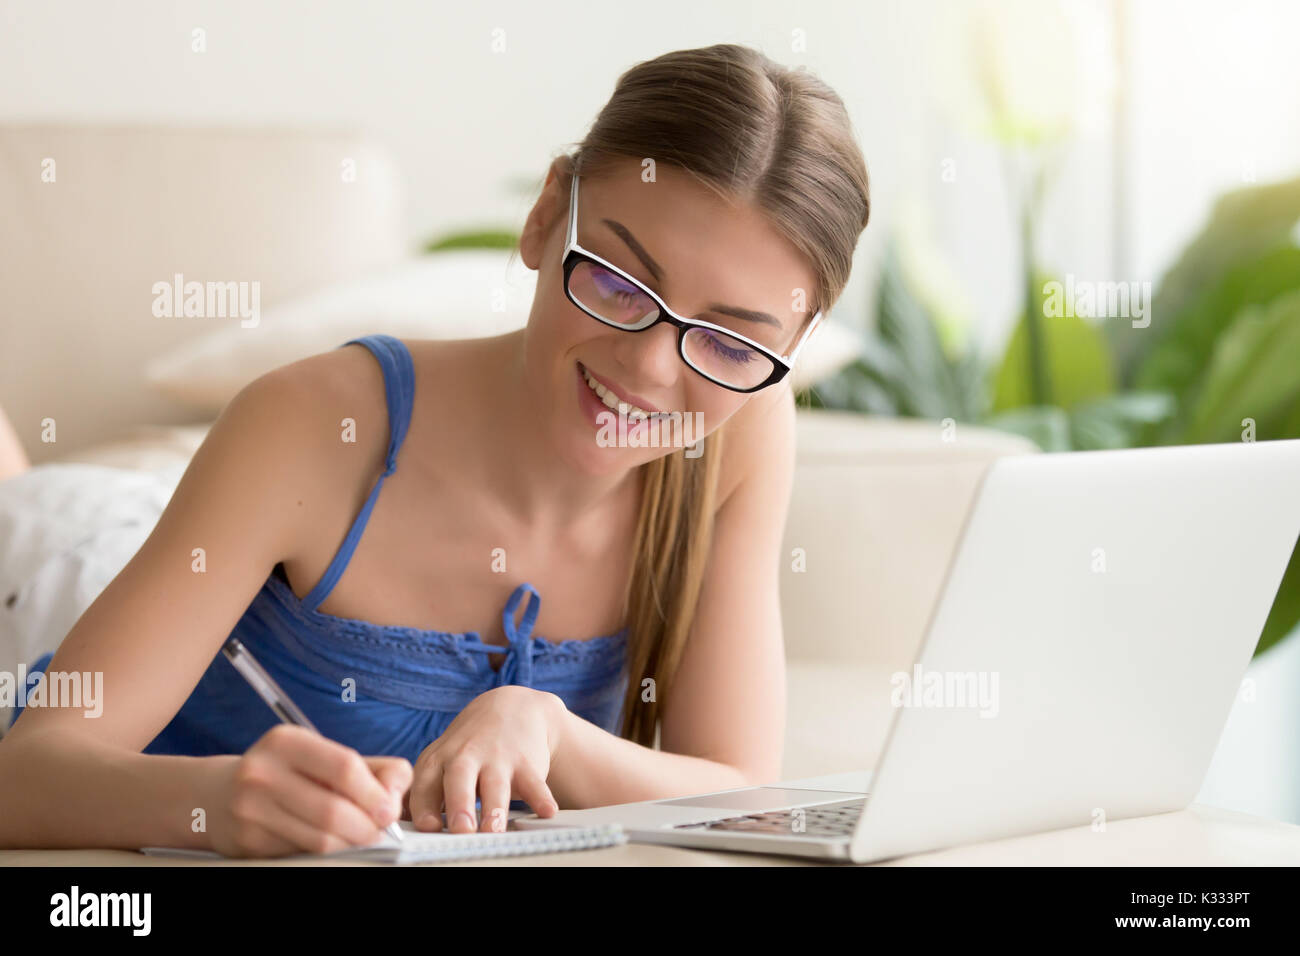 Lady writing in notebook when using laptop at home Stock Photo